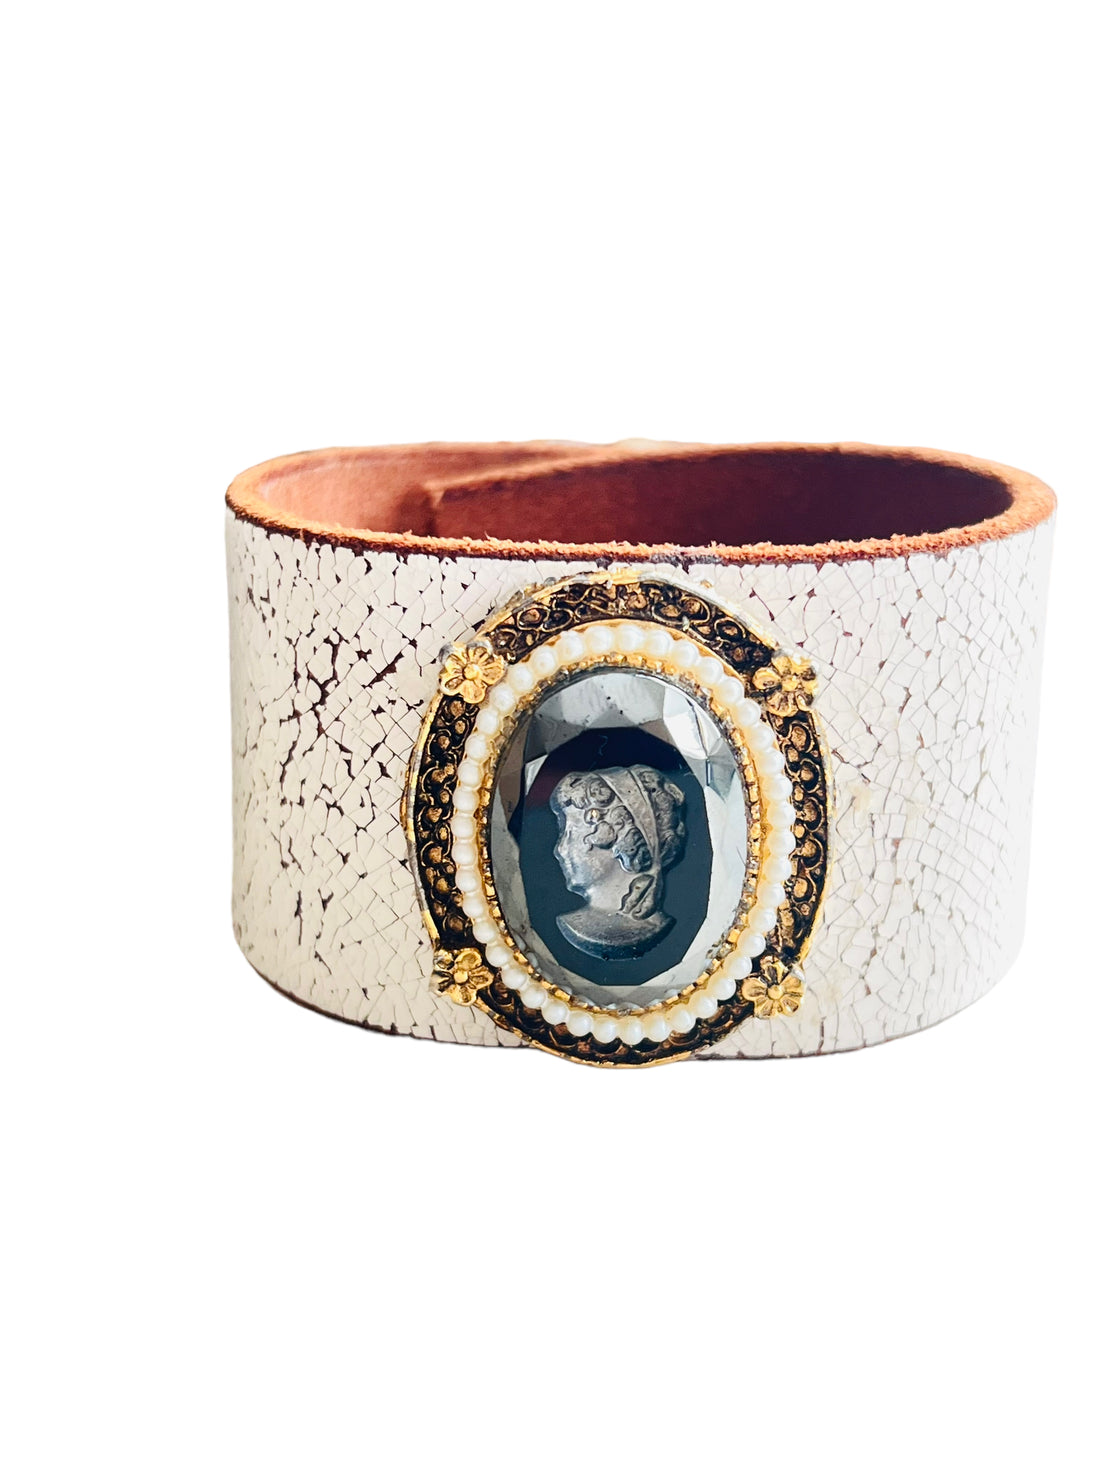 White Leather Cuff Bracelet featuring a vintage side profile cameo image of a women surrounded with flowers and pearls